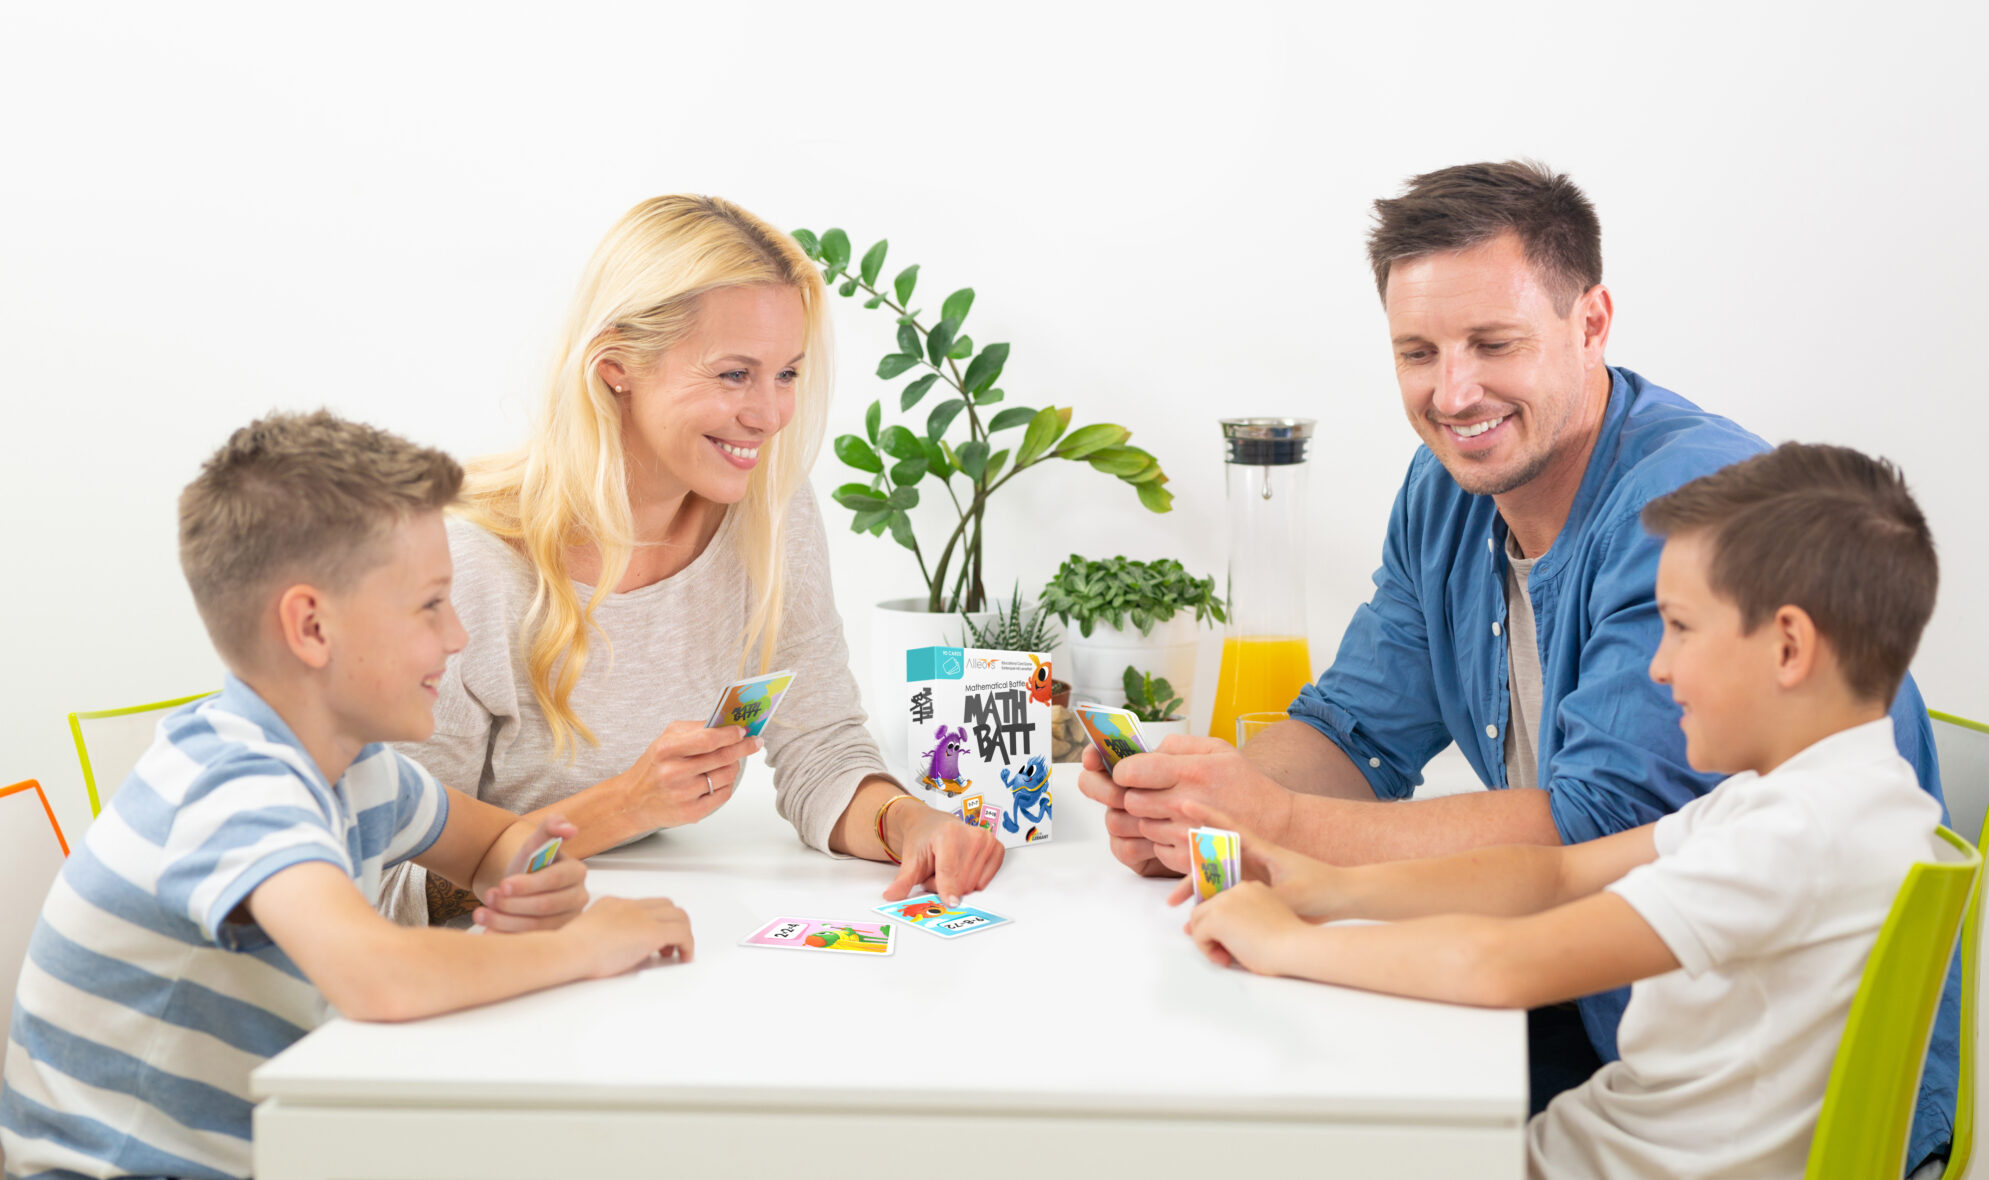 Happy young family playing card game at dining table at bright modern home.